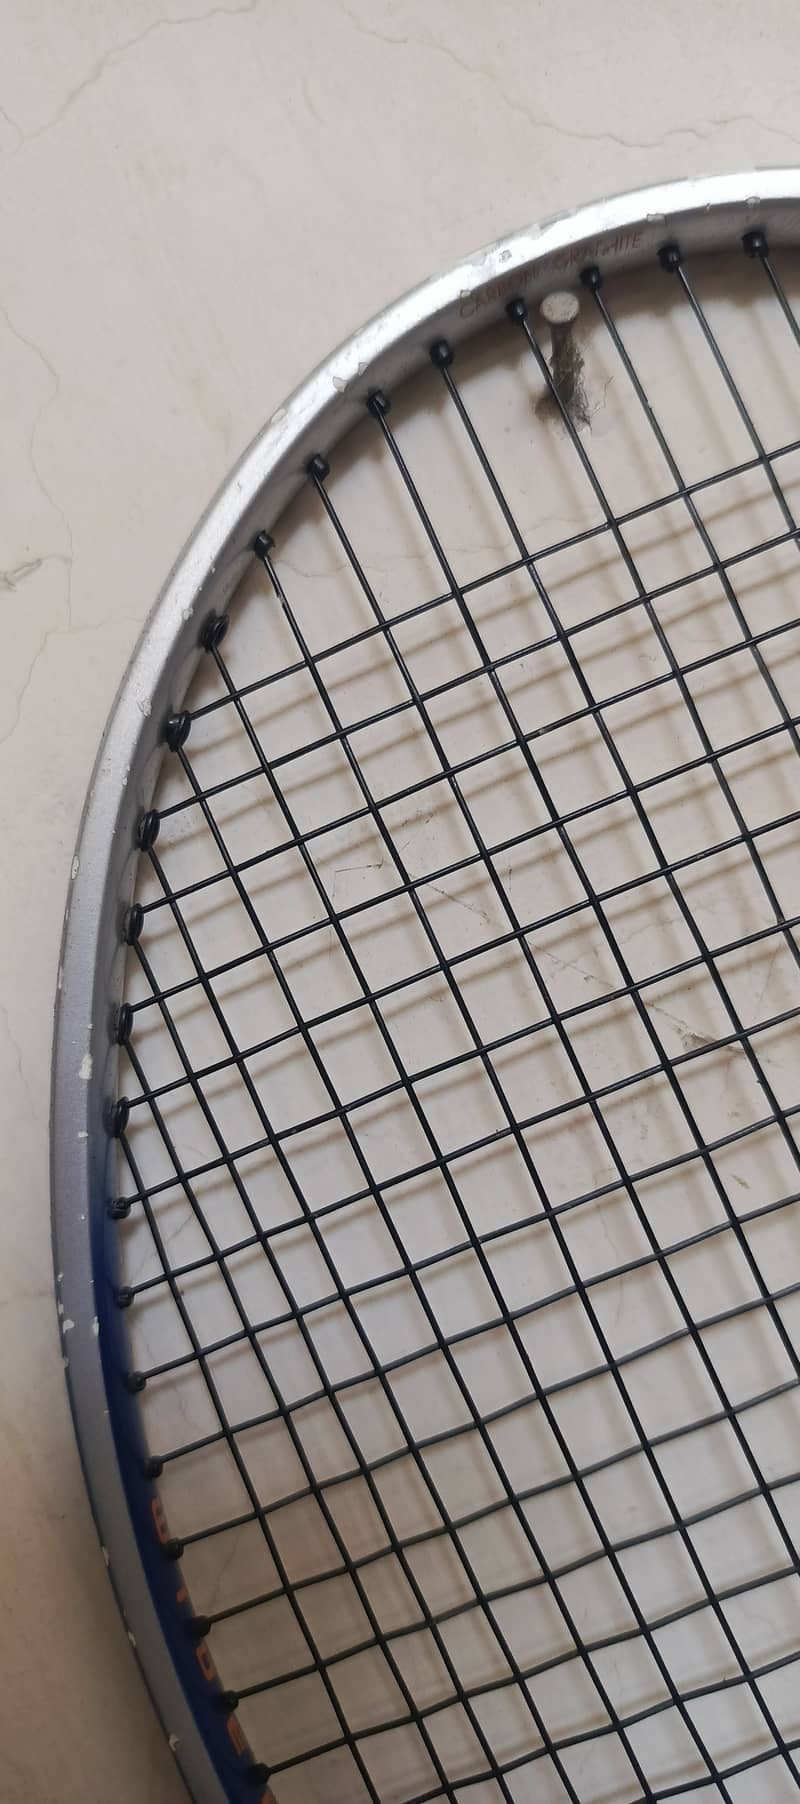 Badminton Racket | Hiqua 150 made in USA weight 84 tension 28 lbs 3